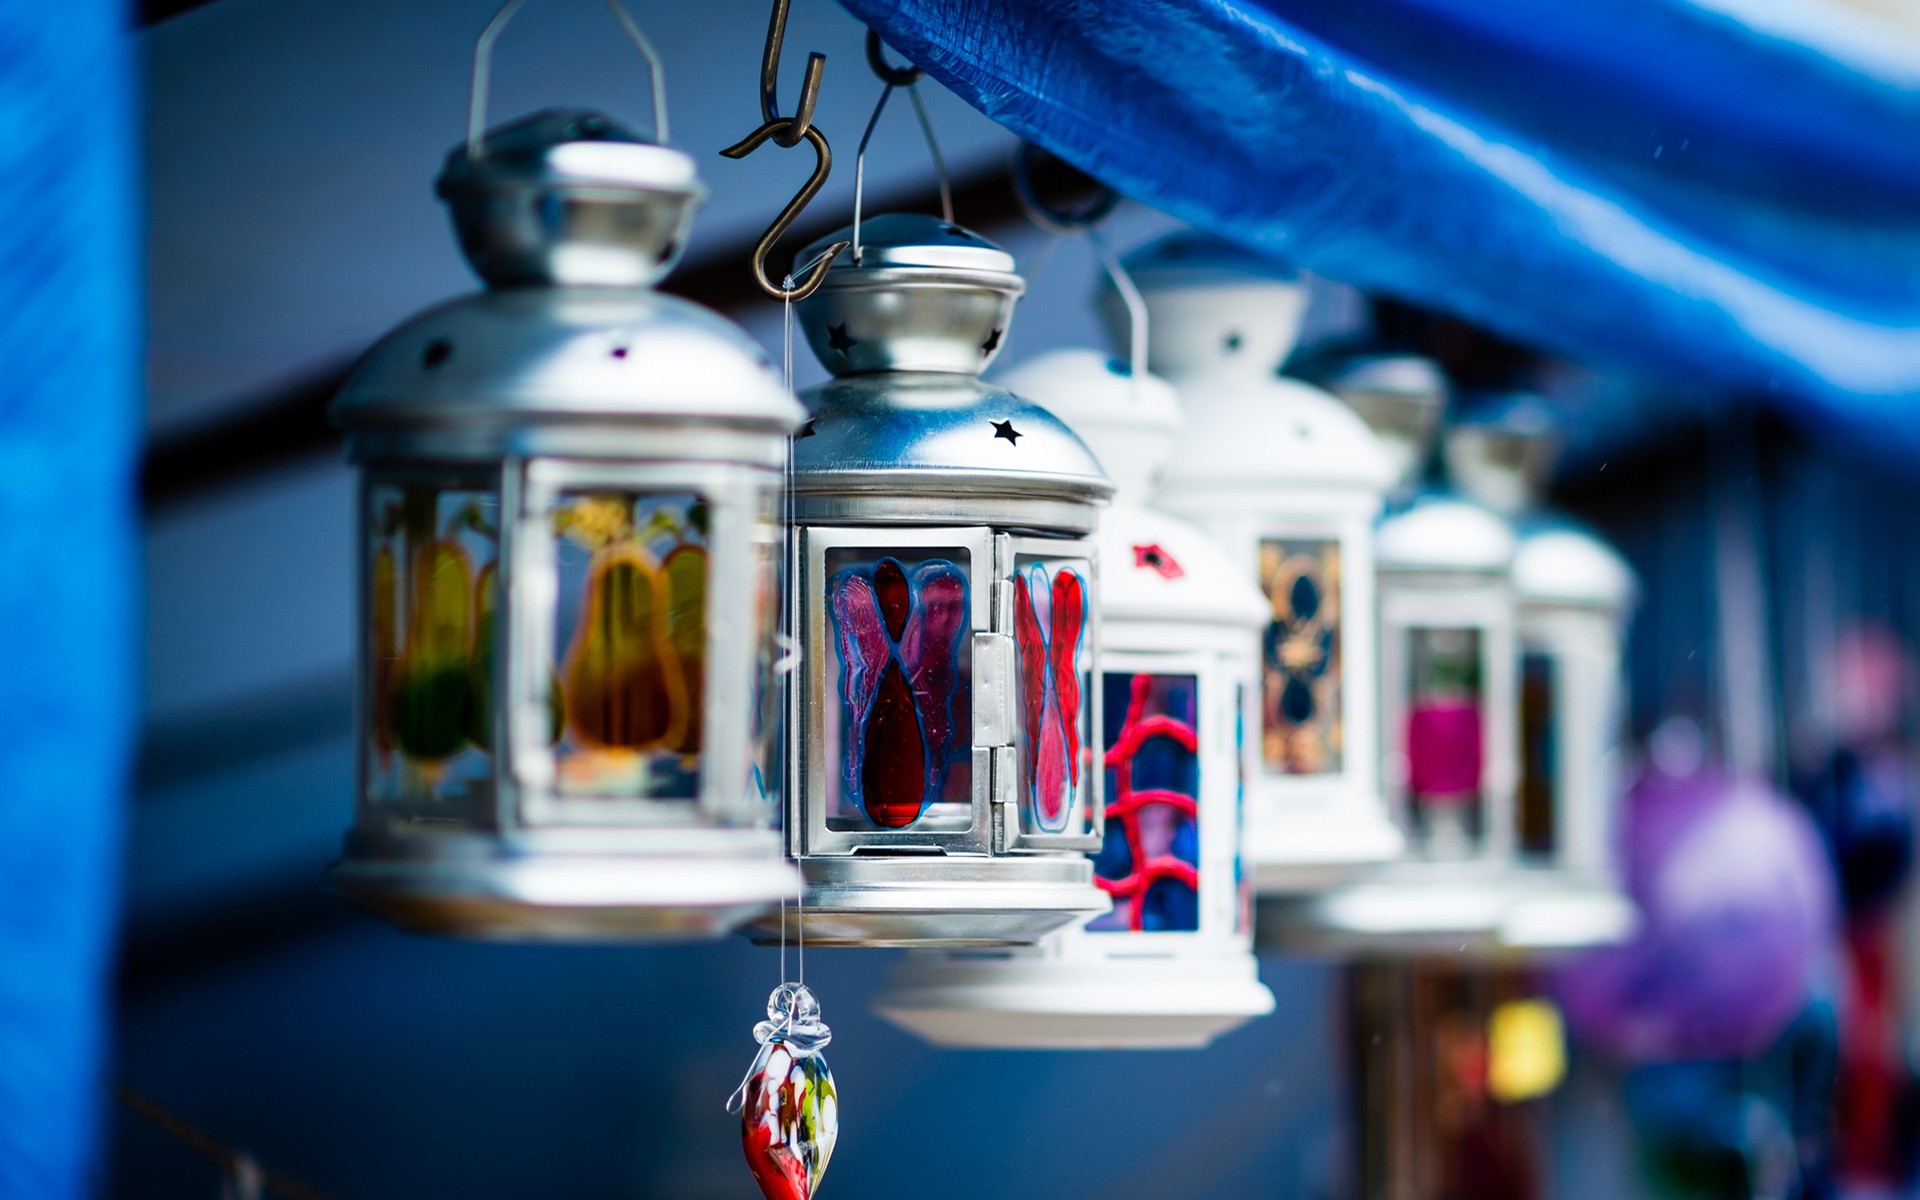 General 1920x1200 lantern decorations stained glass lamp macro blue flames blurred photography depth of field